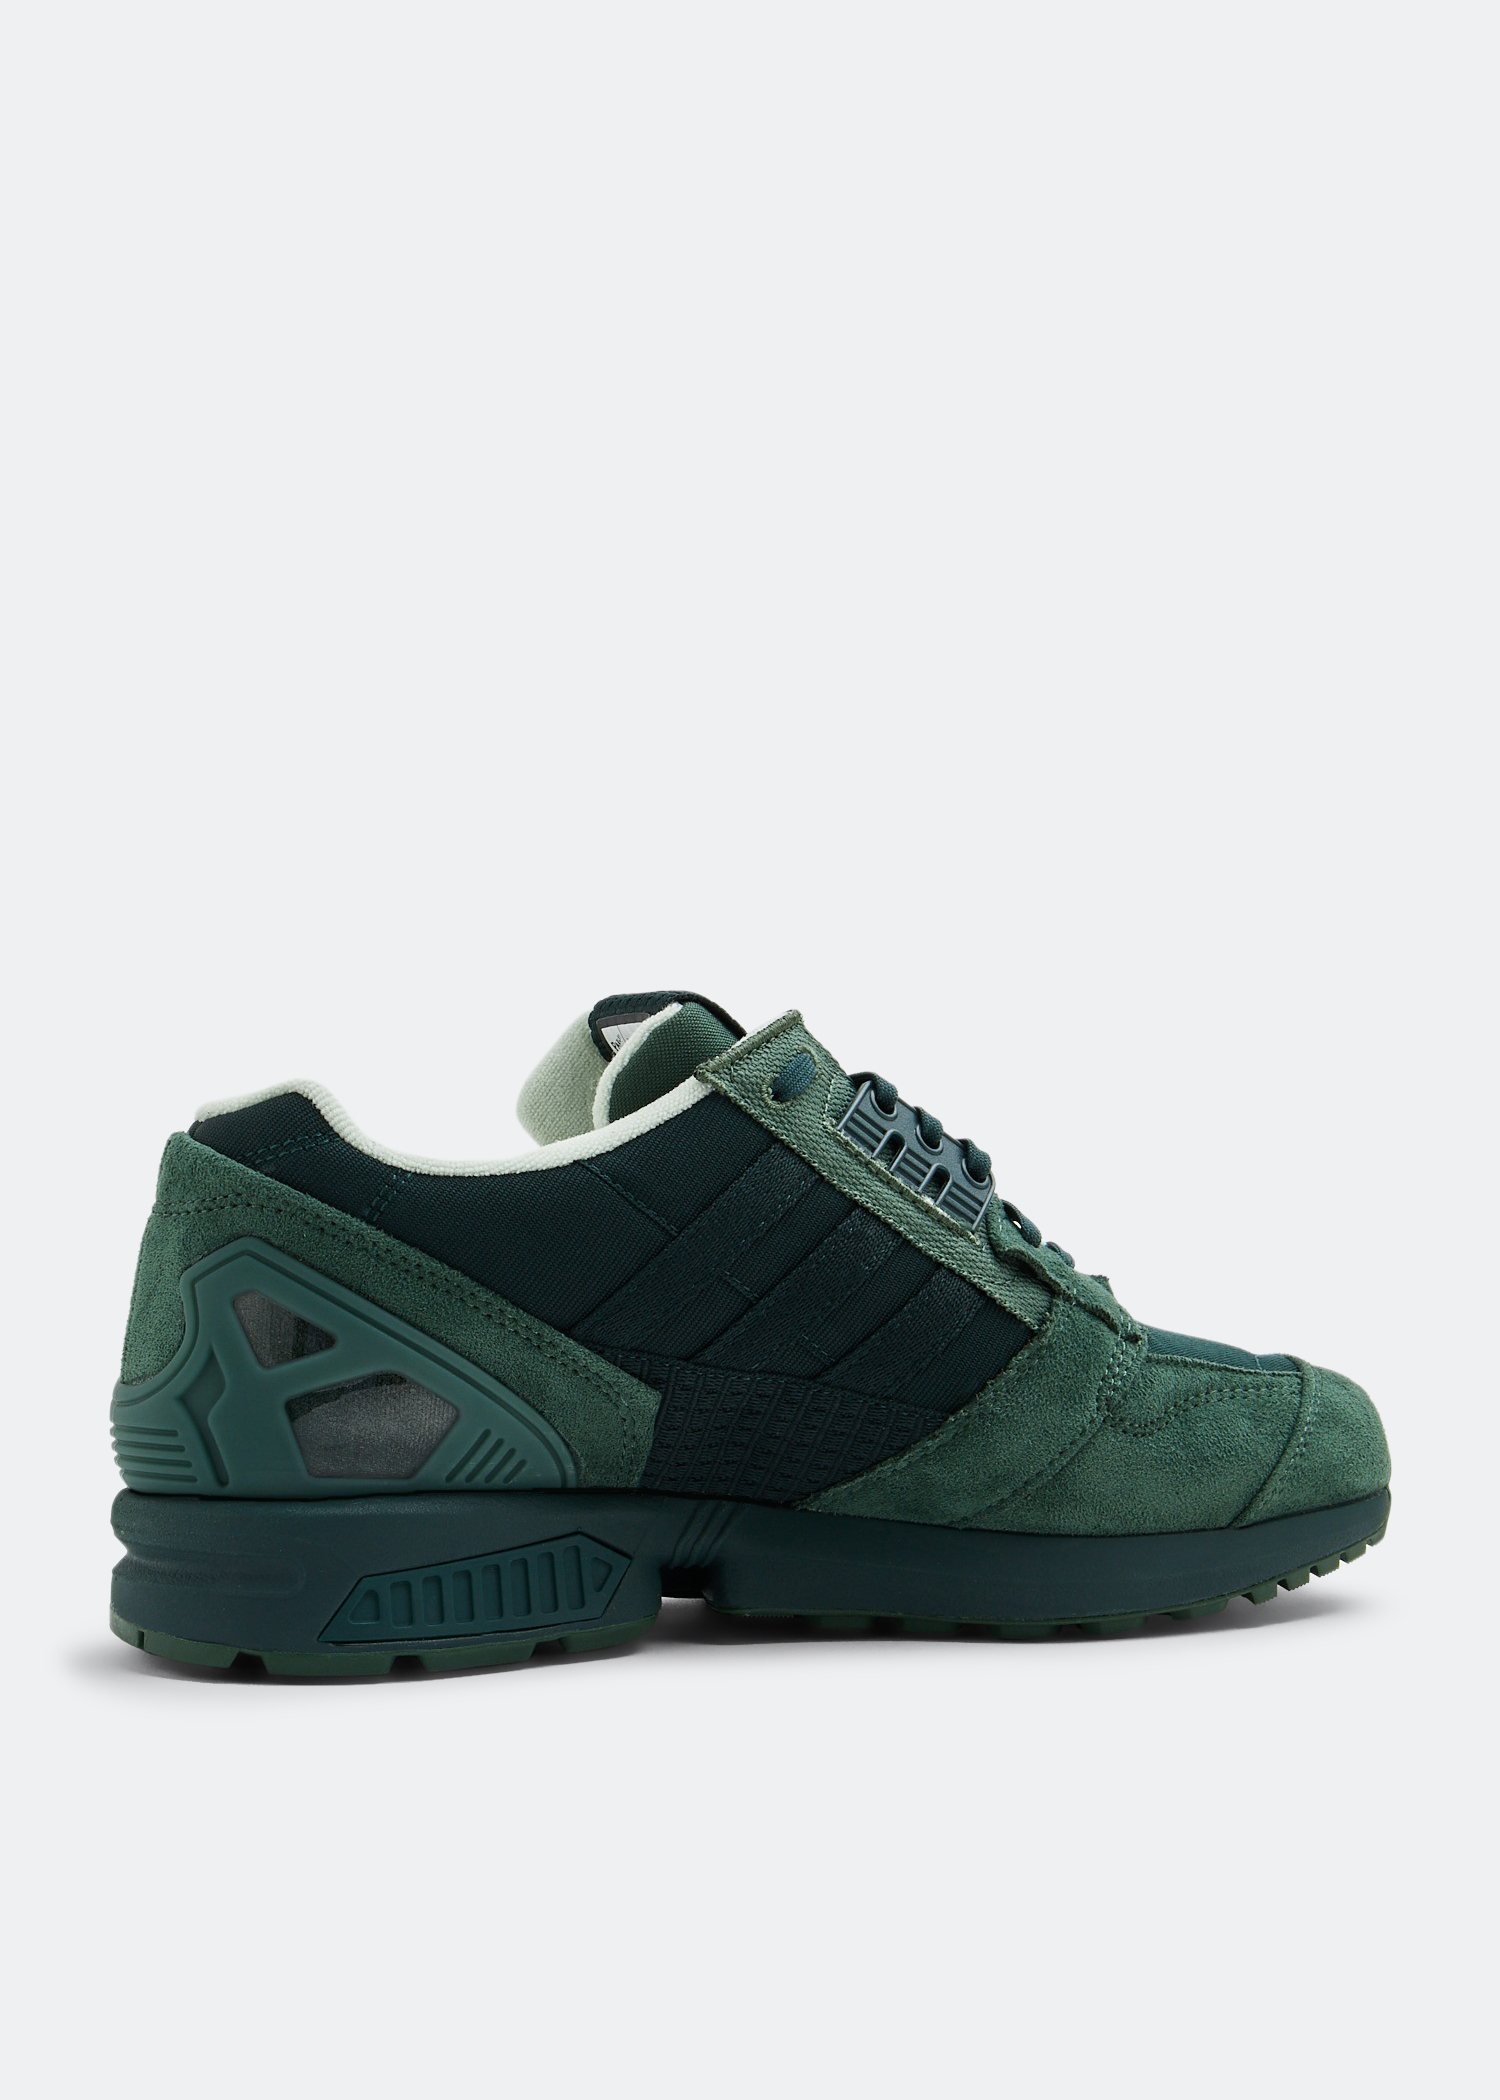 Adidas ZX 8000 Parley sneakers for Men - Green in KSA | Level Shoes